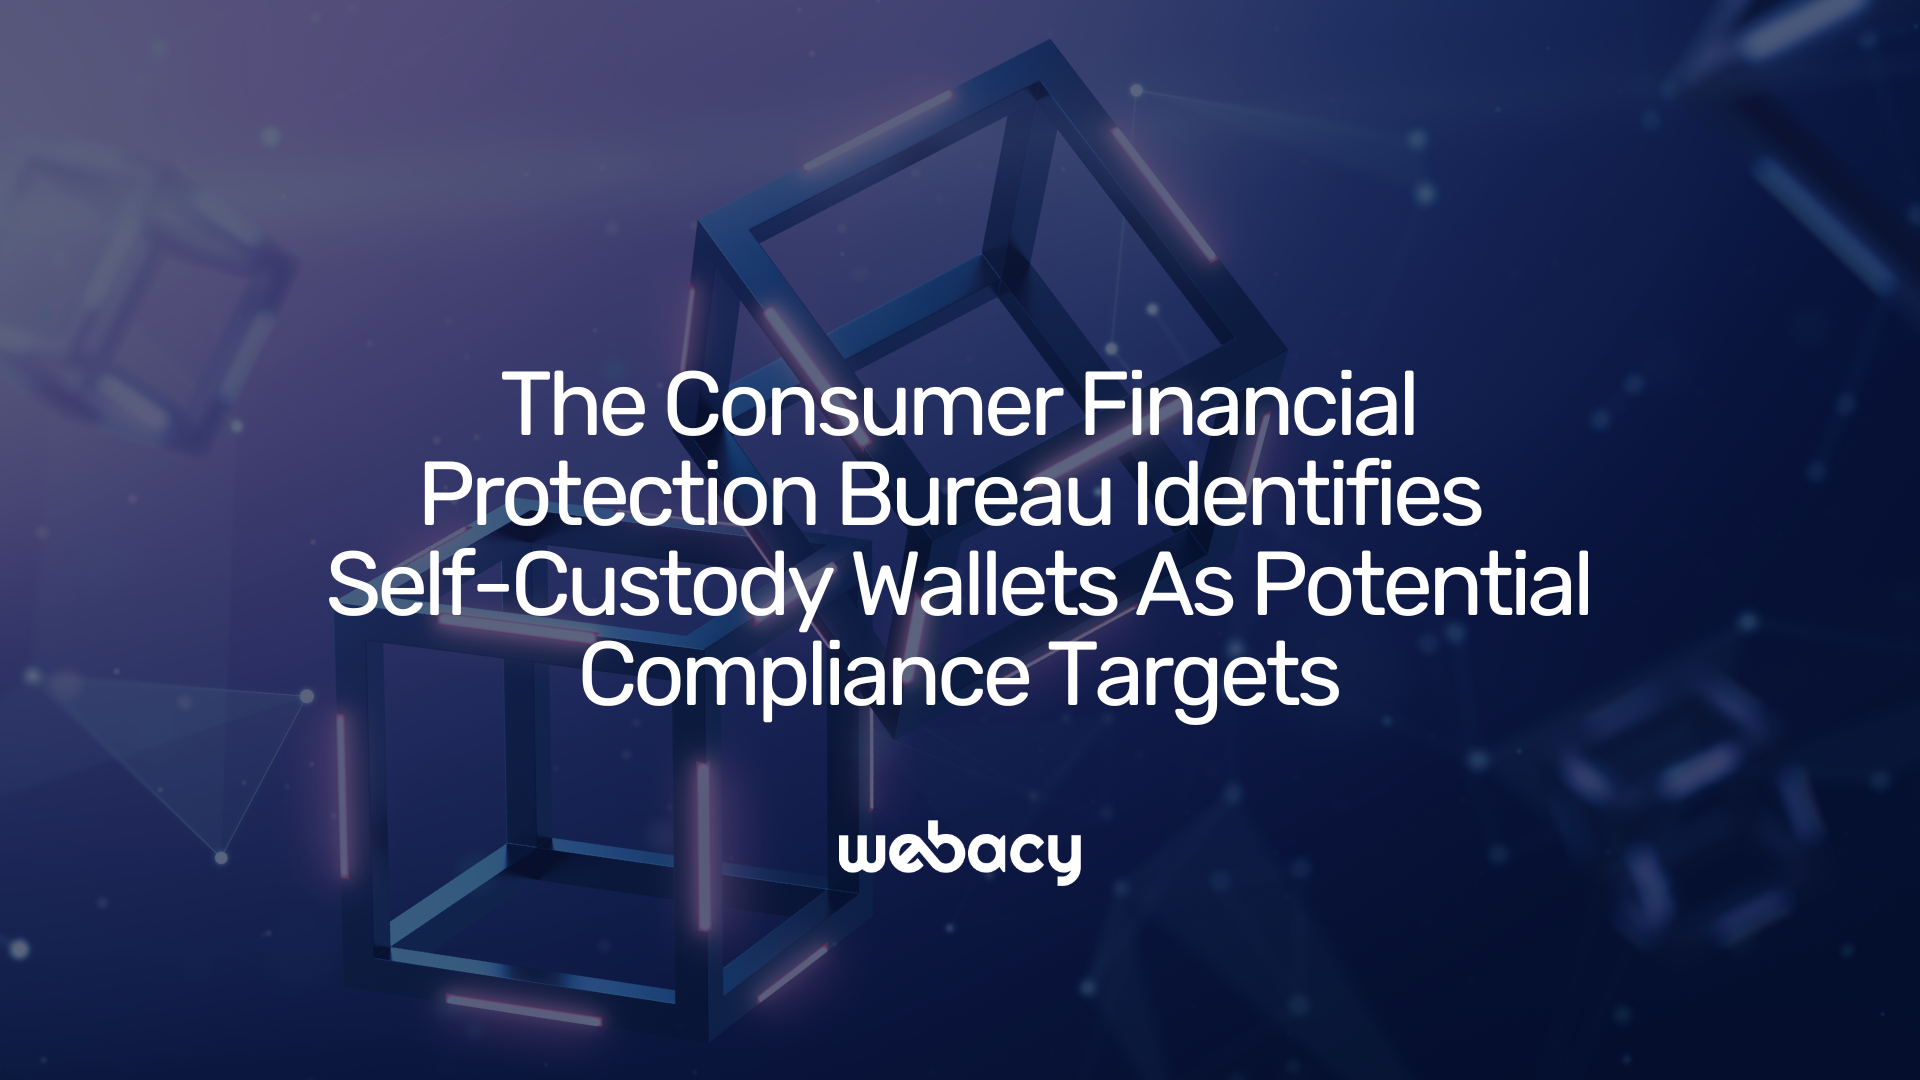 The Consumer Financial Protection Bureau Identifies Self-Custody Wallets As Potential Compliance Targets